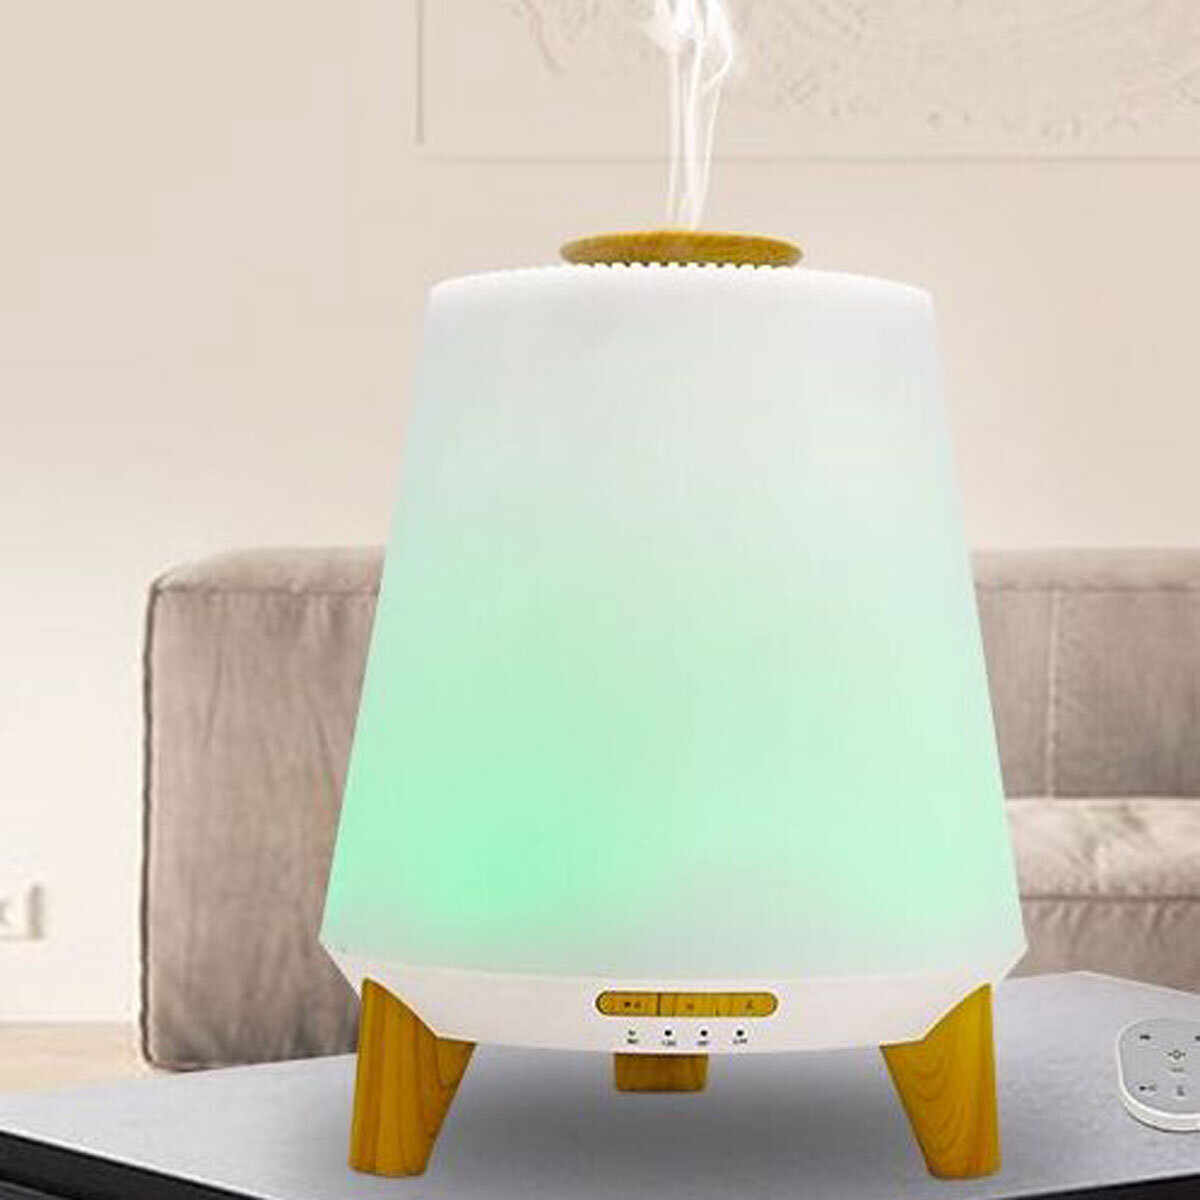 Image of Vybra Atmos Diffuser in green